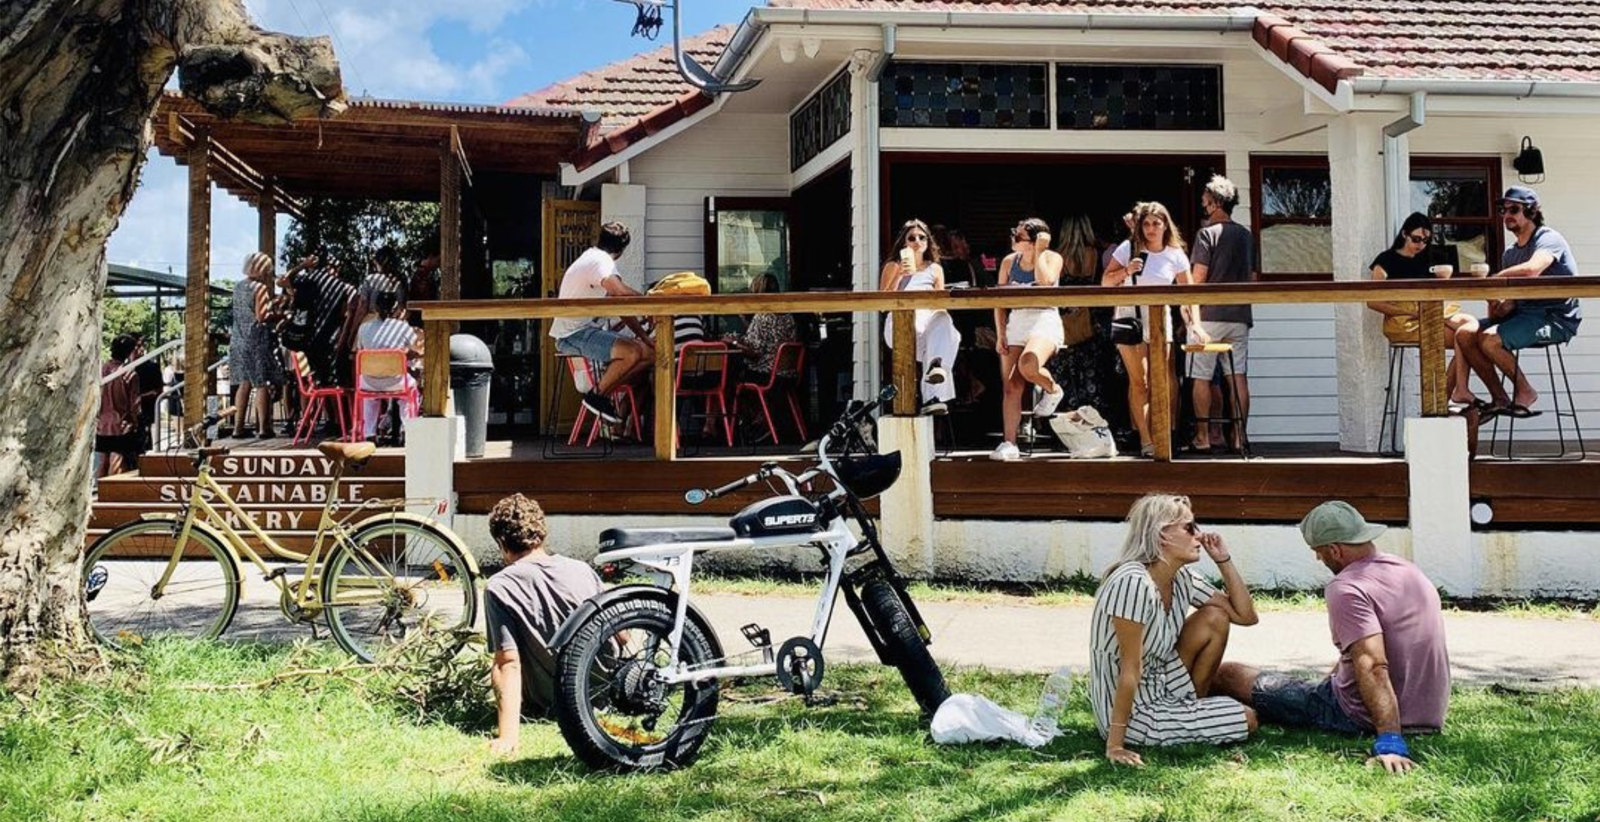 Exterior shot of Byron Bay Cafe 'sunday sustainable bakery' with people sitting in the sun